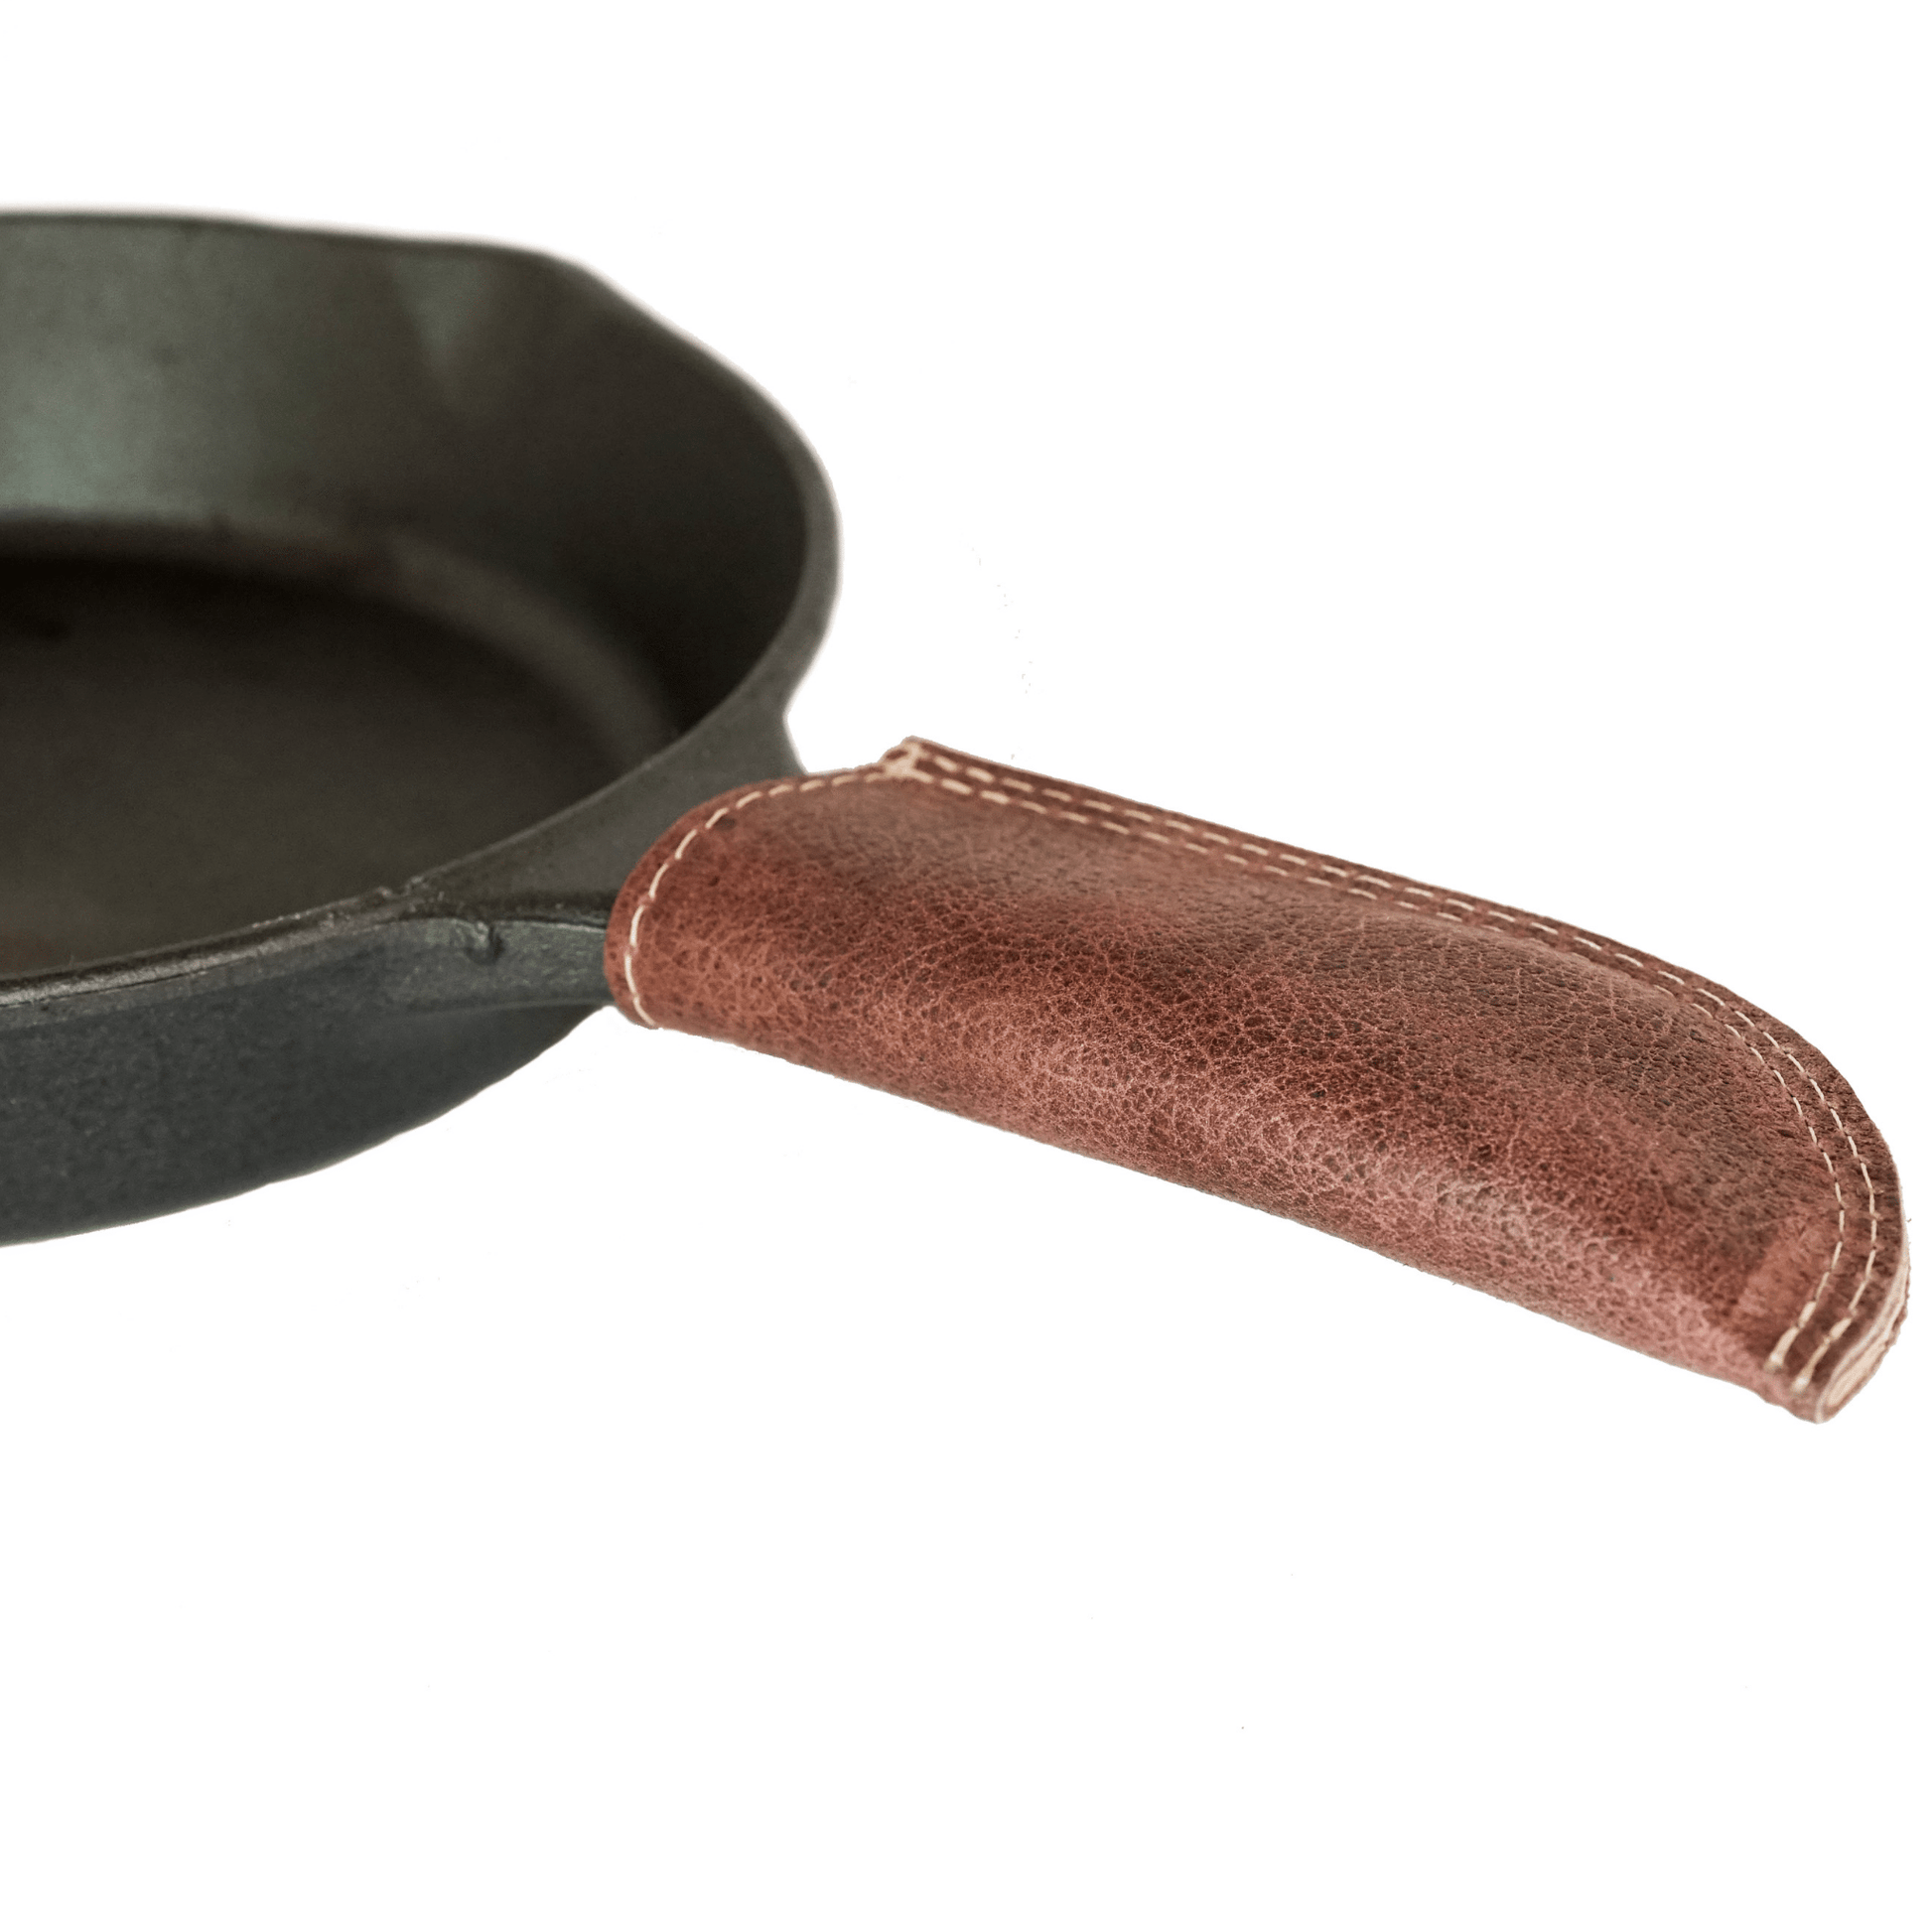 https://atitlanleather.com/cdn/shop/products/atitlan-leather-accessories-leather-pan-handle-11002380943443.png?v=1615301077&width=1946